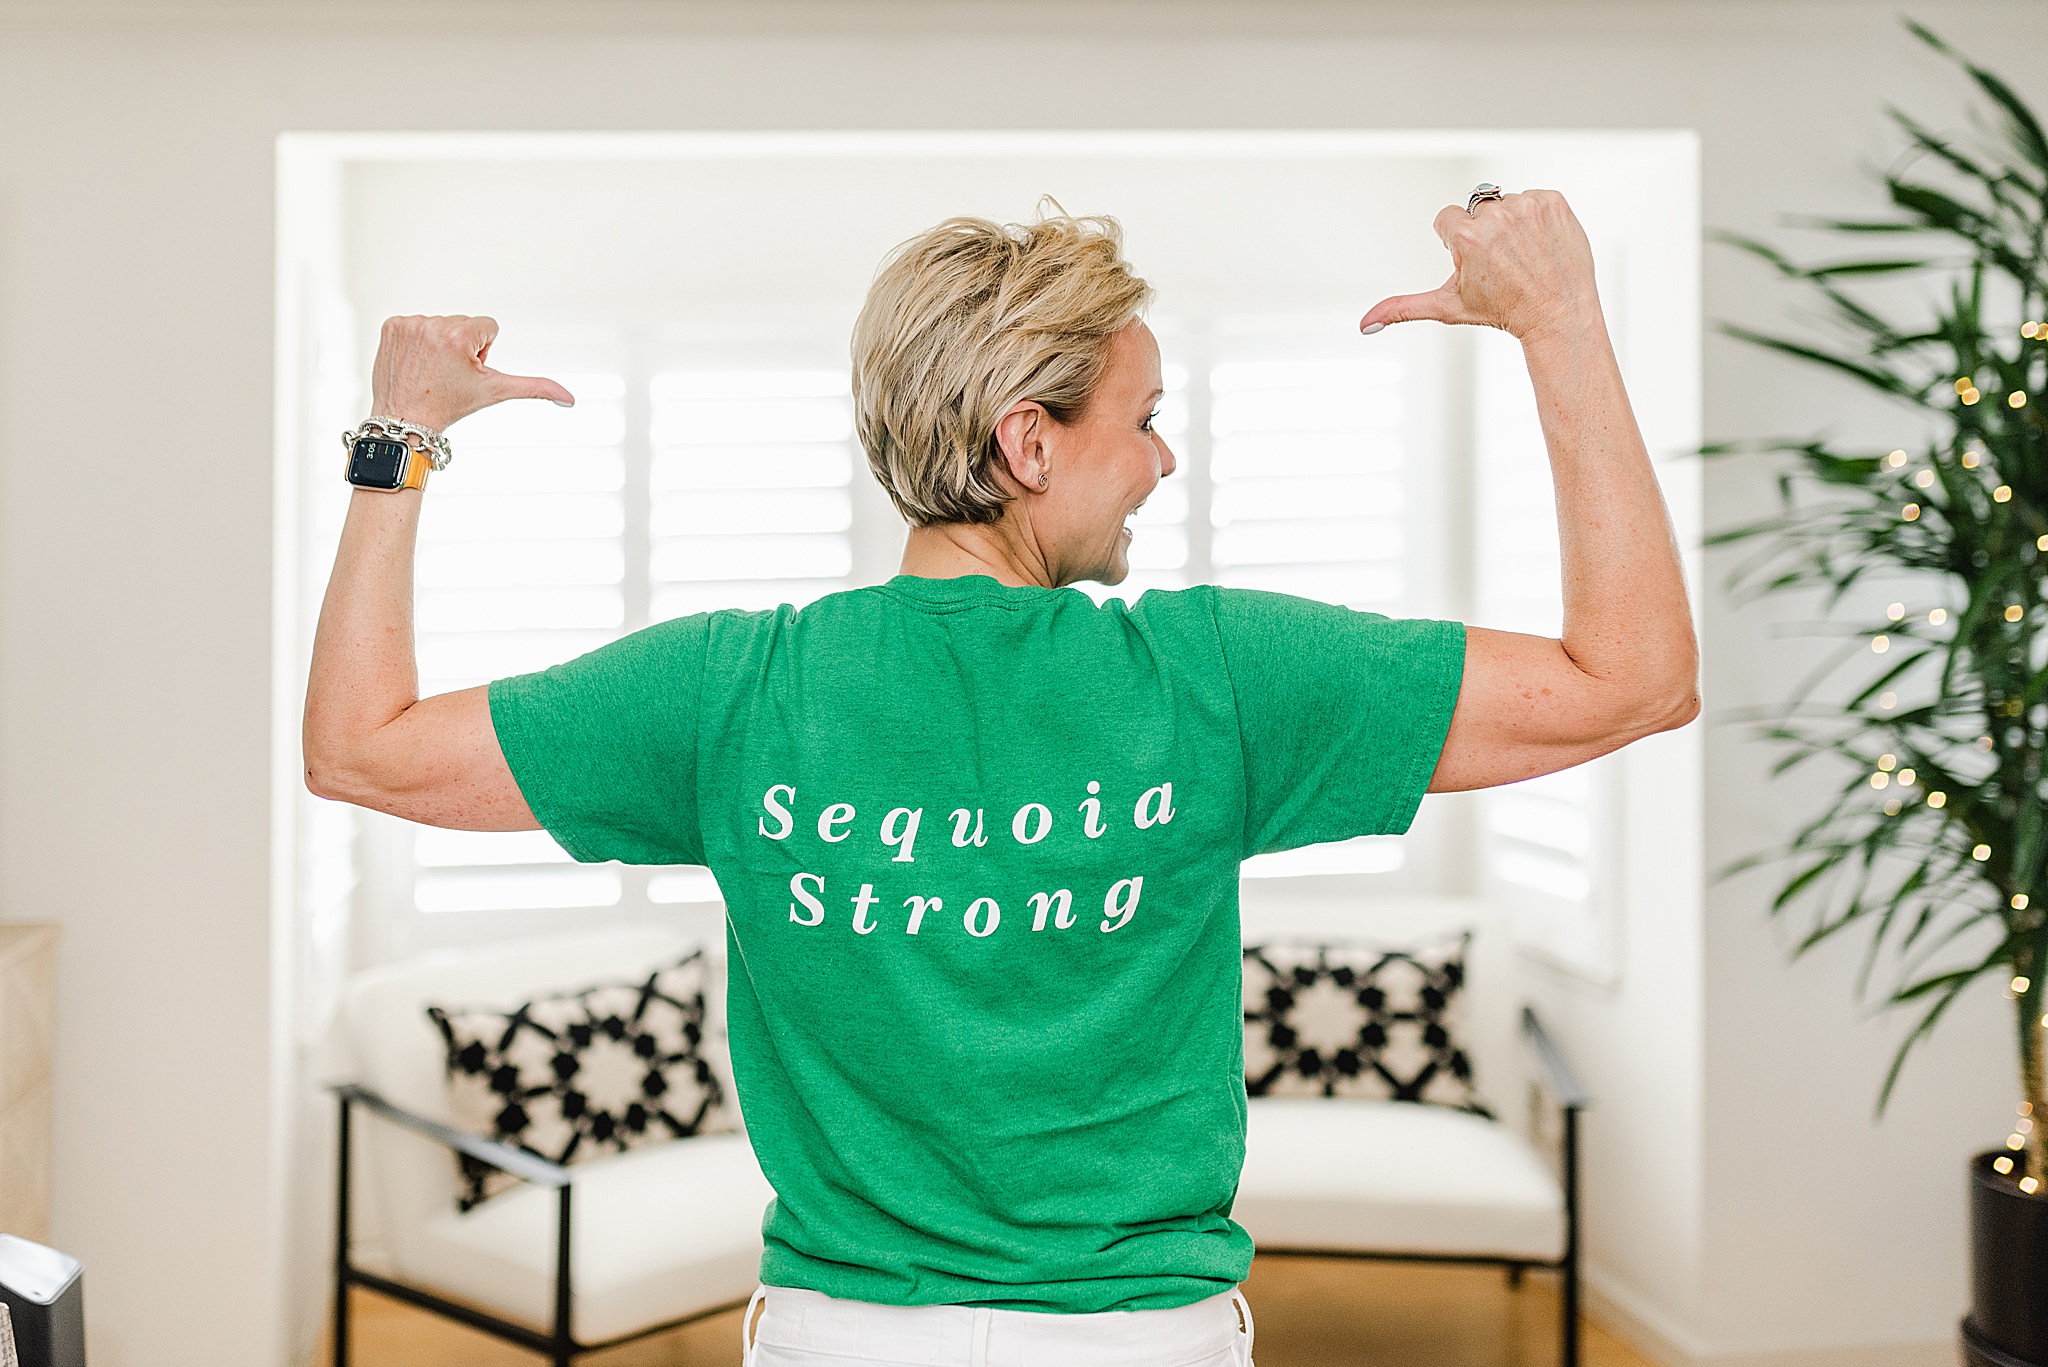 Woman standing with her back to the camera is wearing a green shirt that says "Sequoia Strong" while her arms are raised and her thumbs pointing to the shirt.